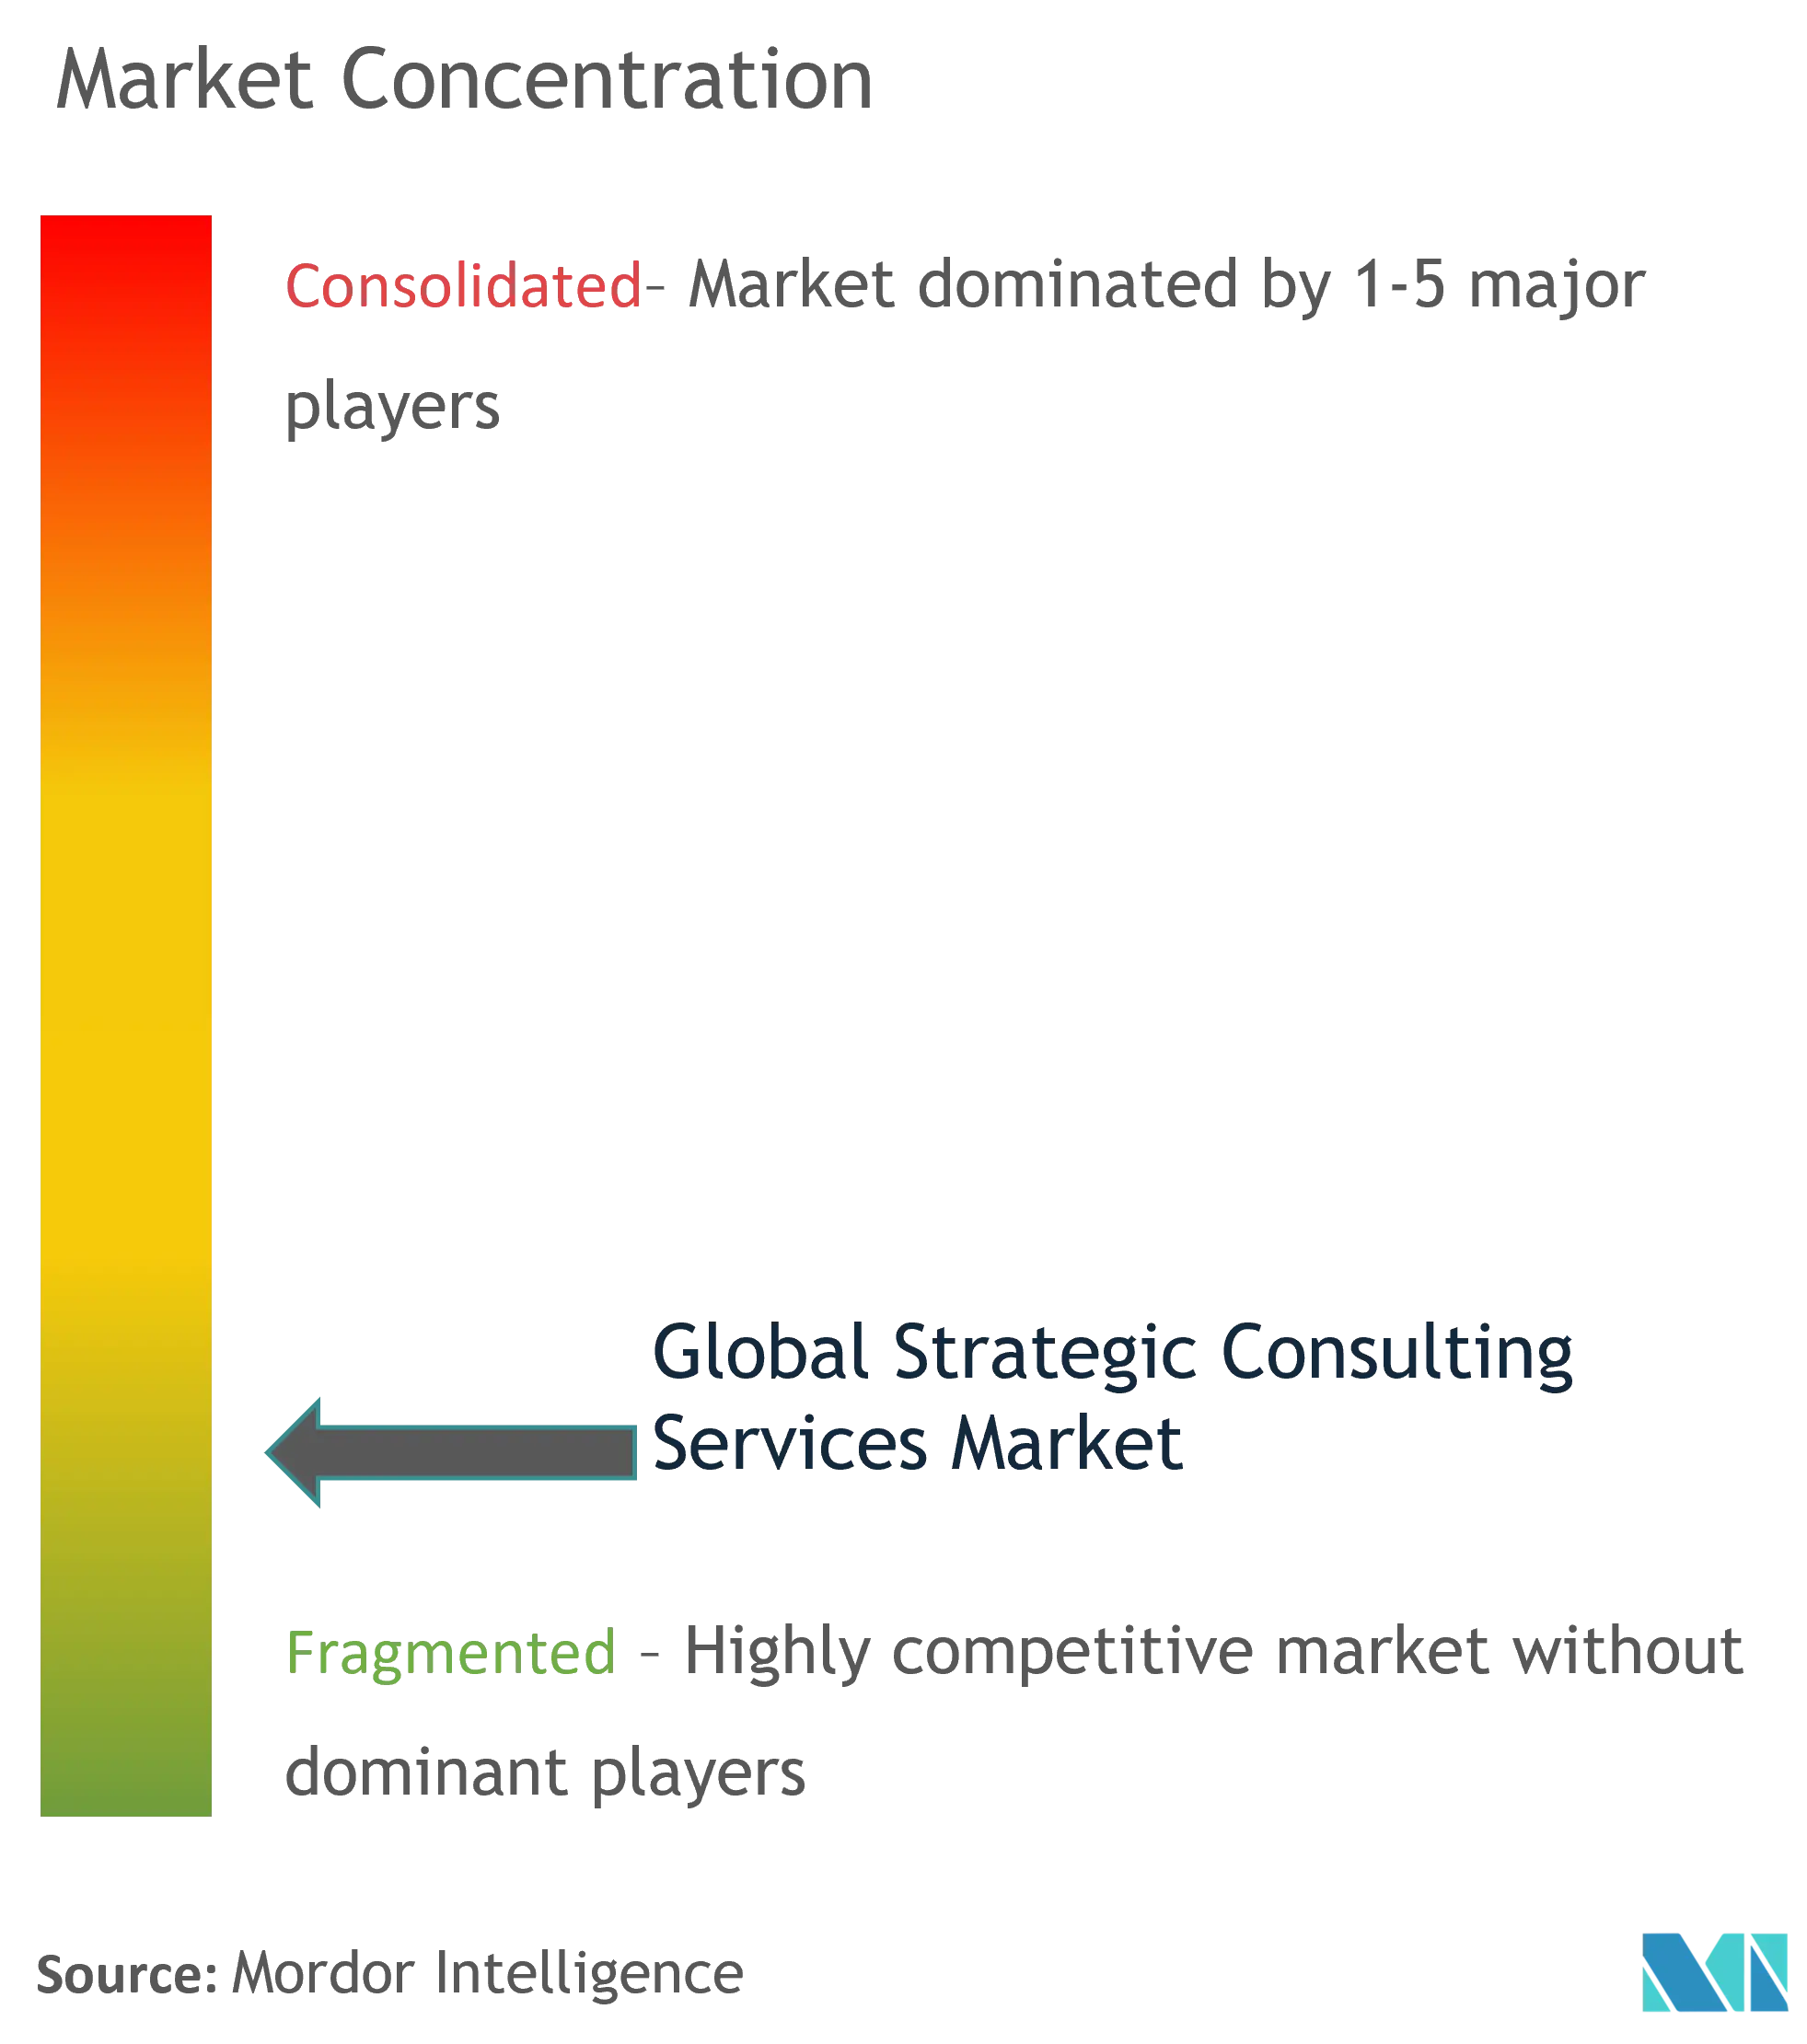 Strategic Consulting Services Market Concentration